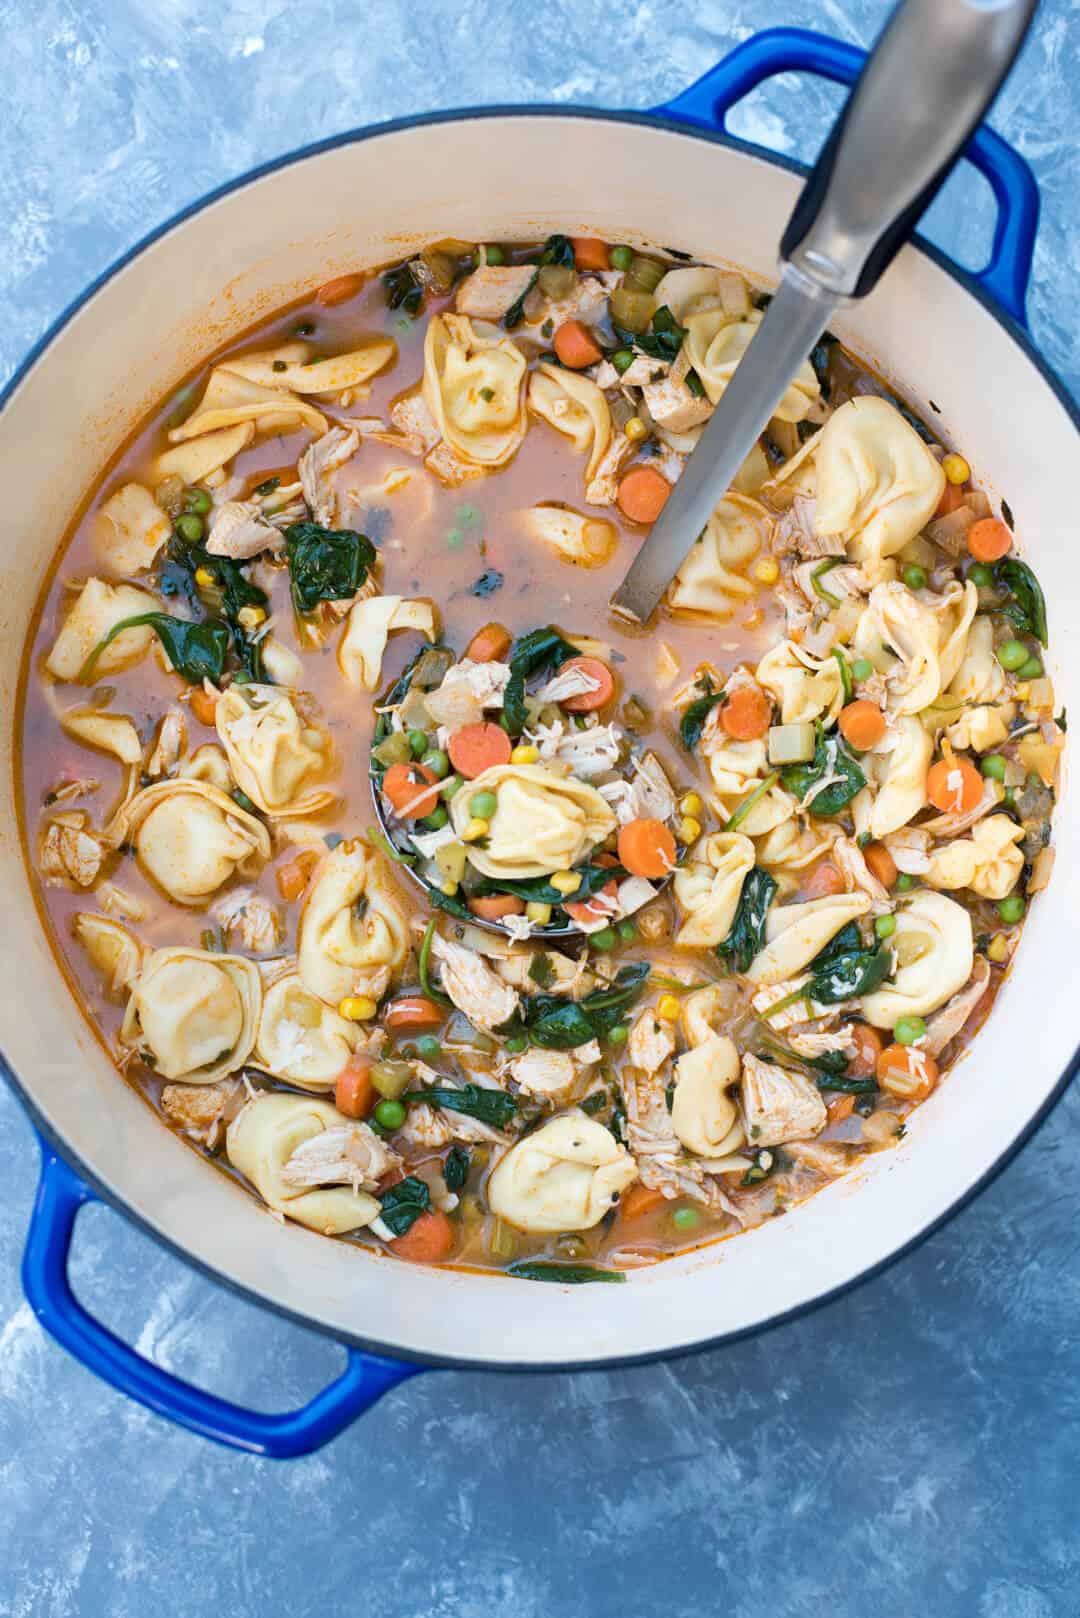 A large blue Dutch oven filled with Chicken Vegetable Tortellini Soup and a ladle.